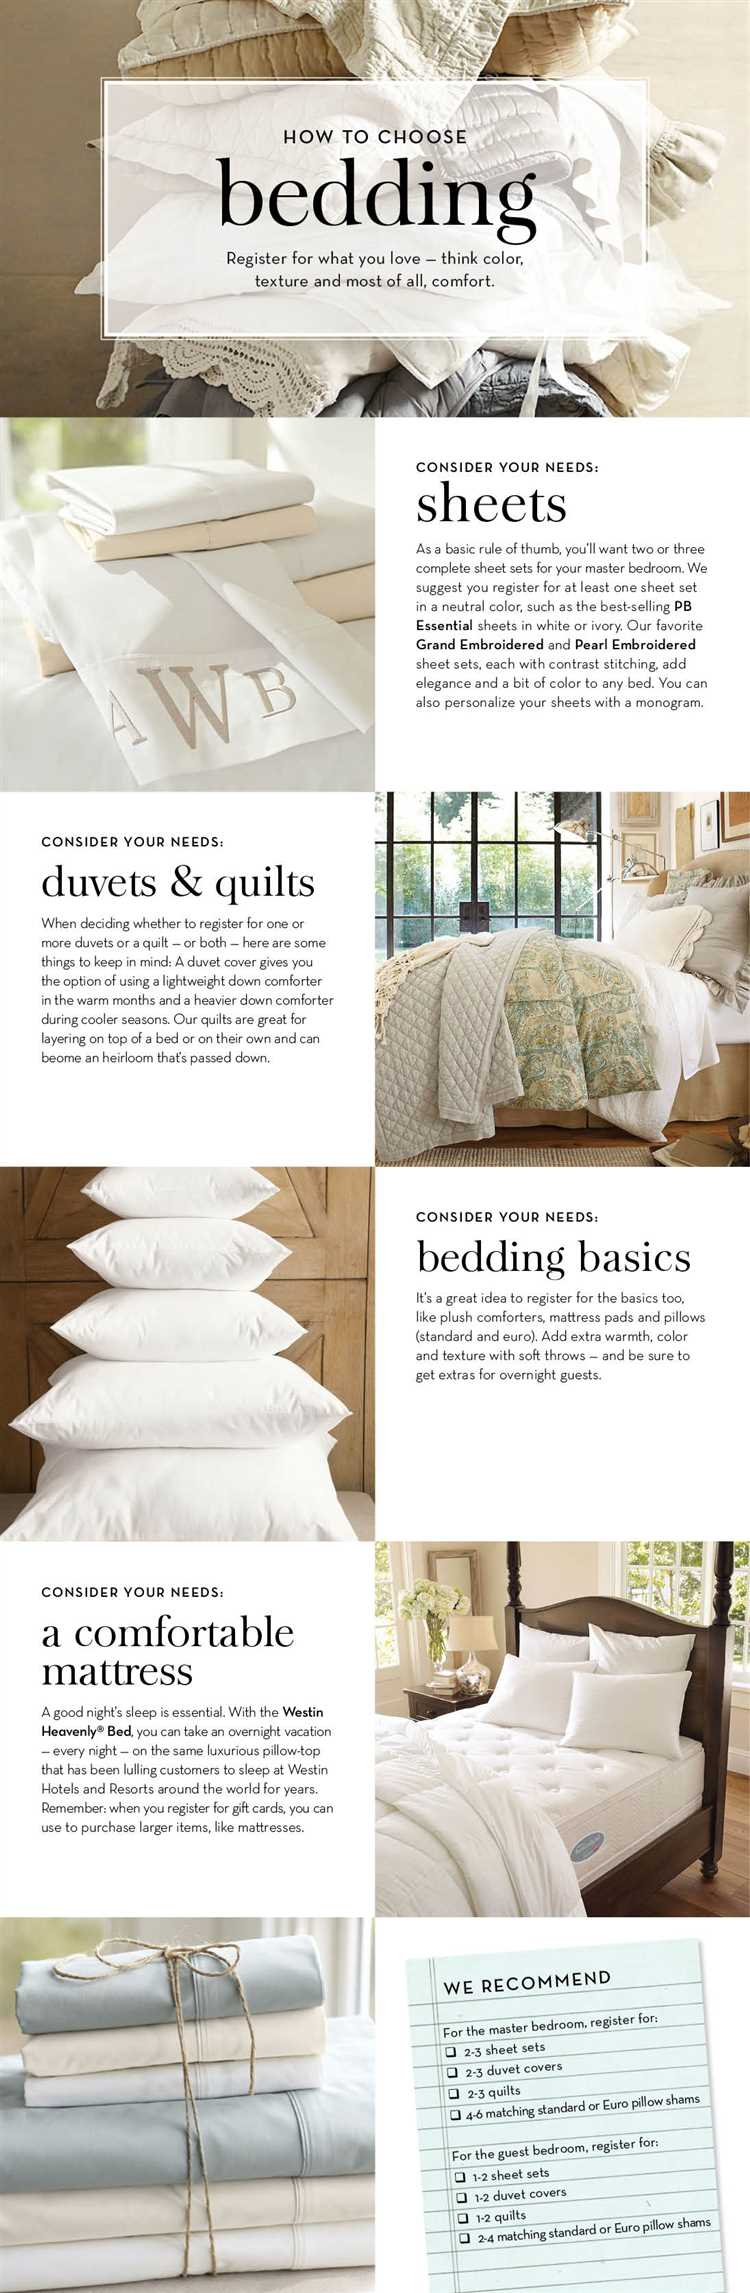 Learn How to Use Pottery Barn Registry Discount for Great Savings